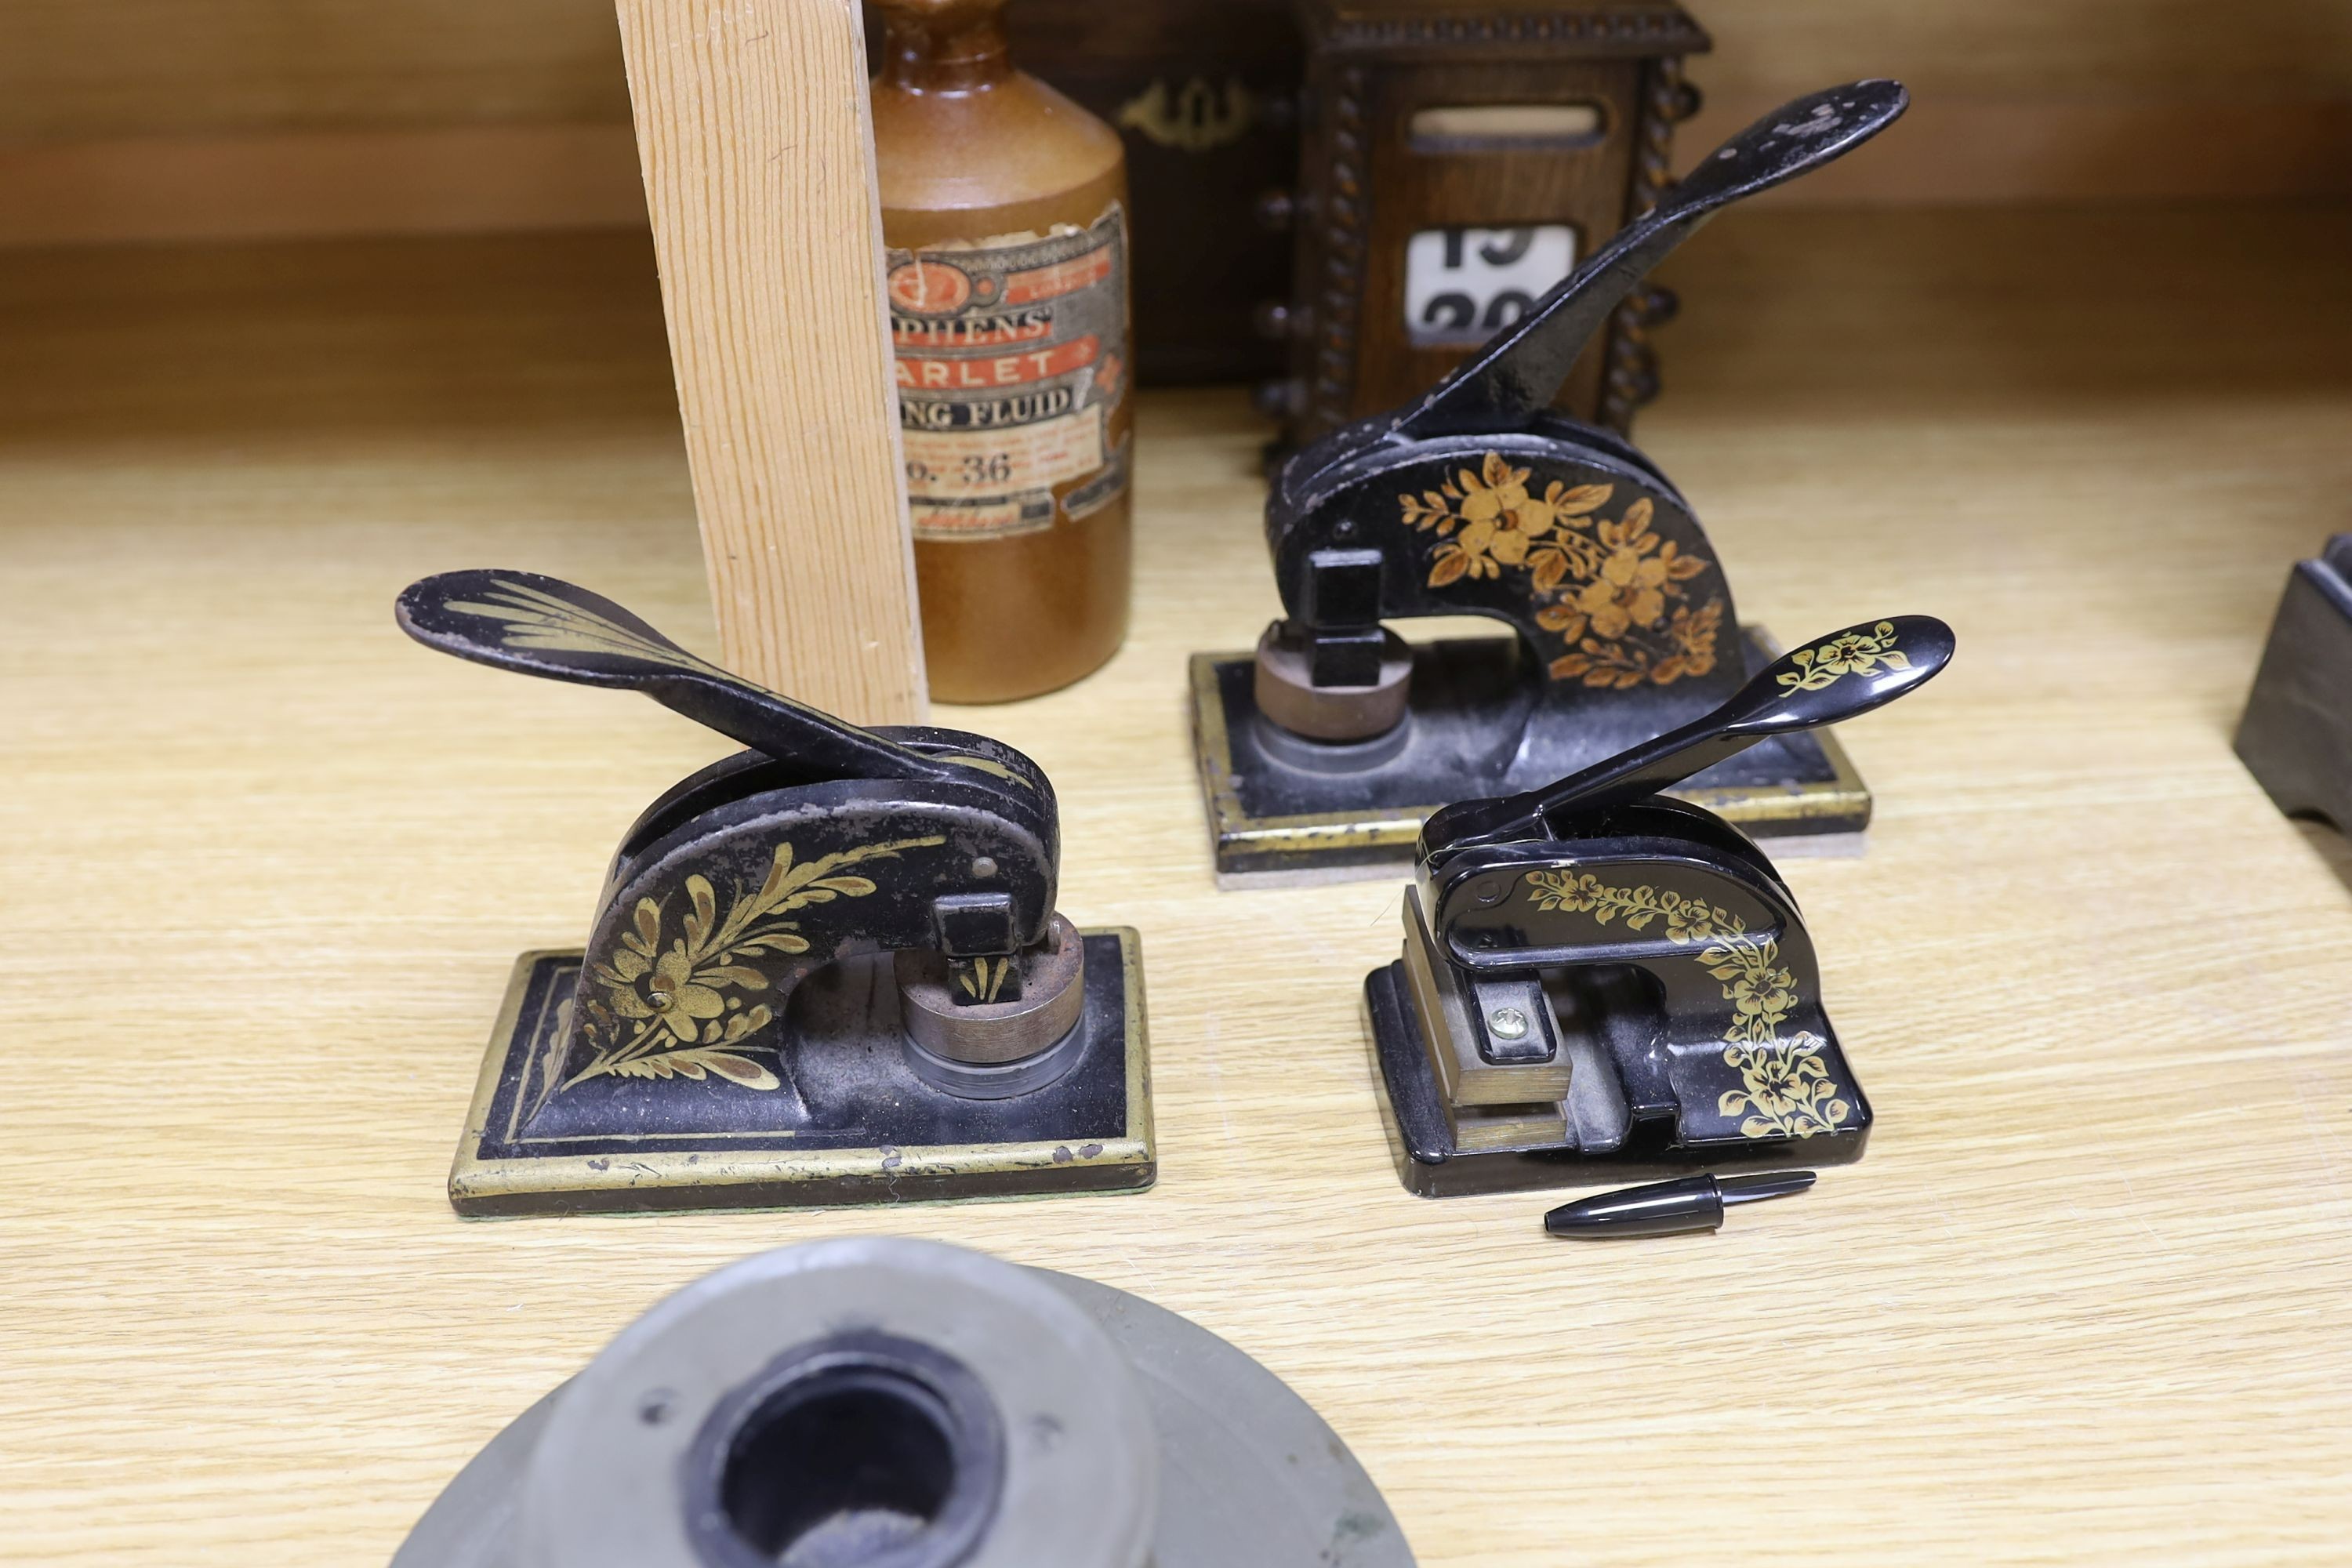 Three Victorian style desk embossing stamps, a terracotta bottle of Stephens 'Scarlet Writing Fluid', a desk calendar, oak box and a desk stand